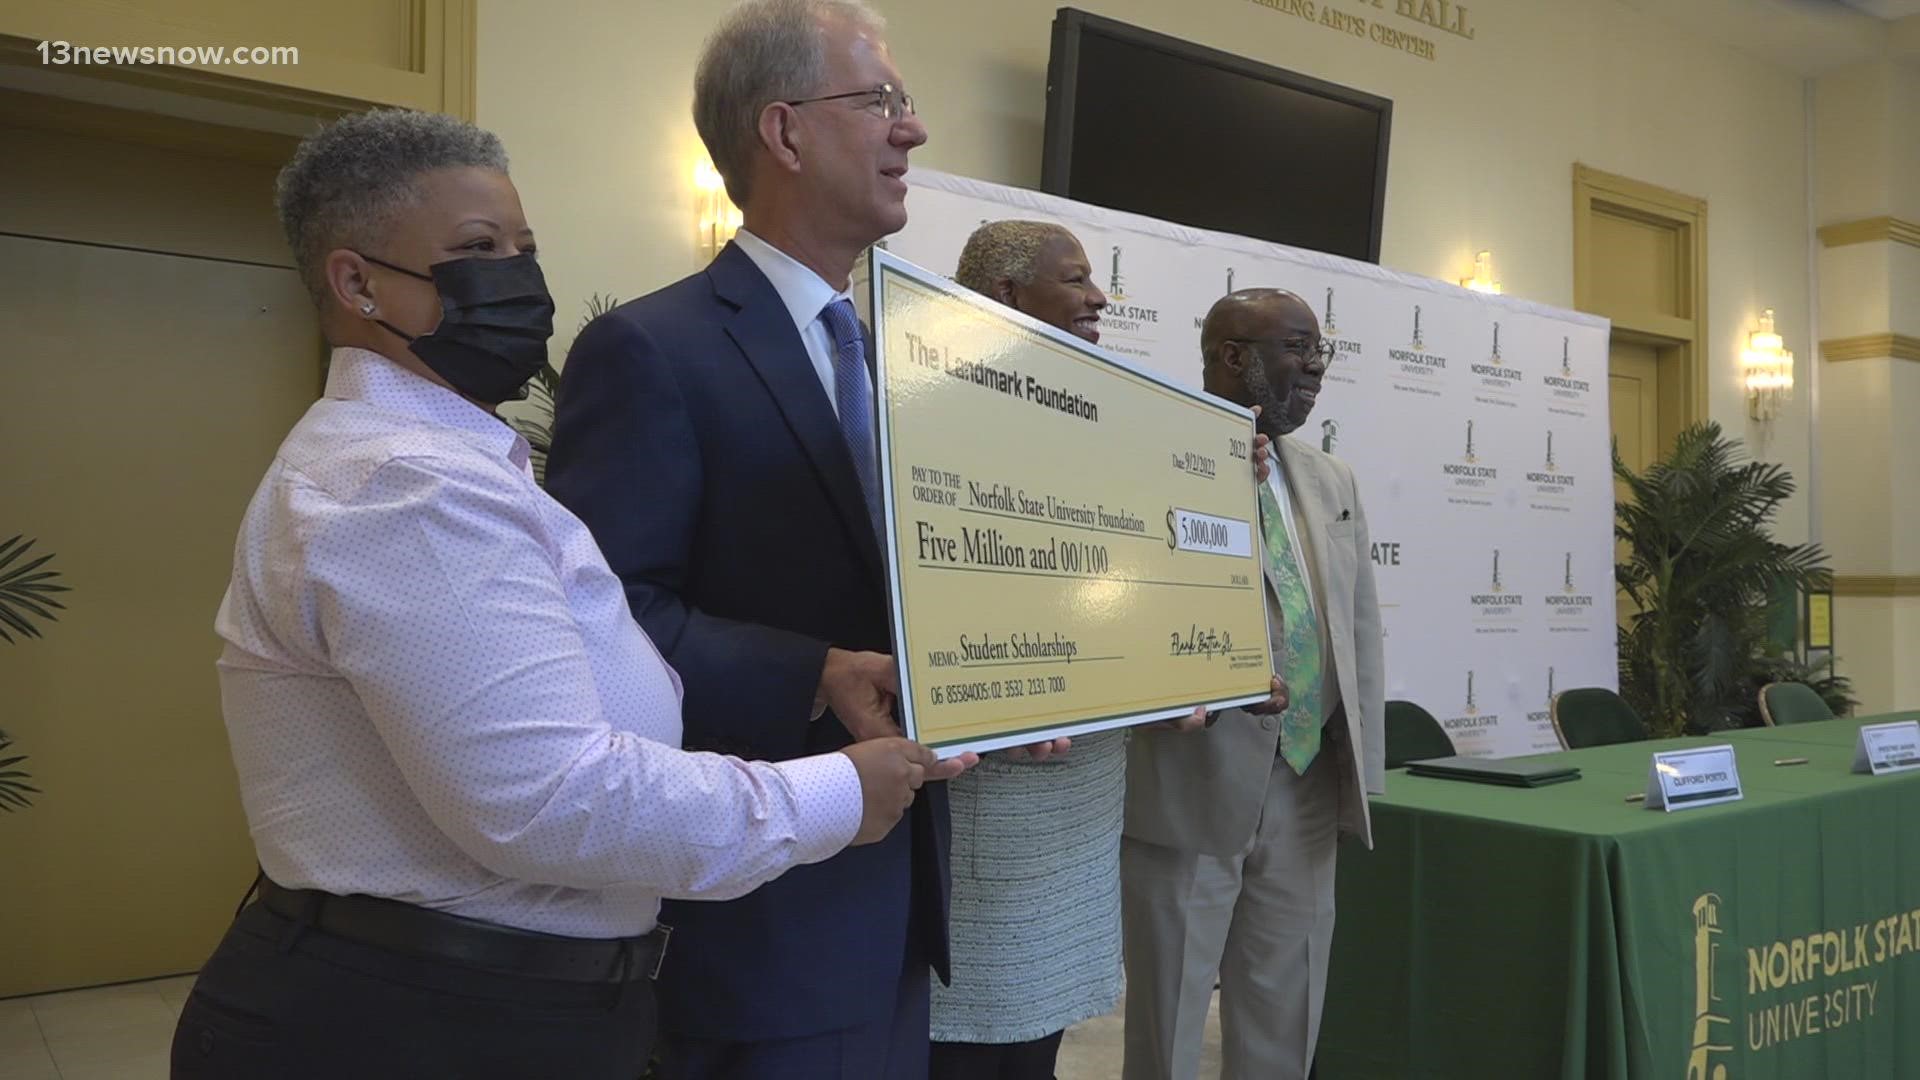 The Landmark Foundation is giving Norfolk State University $1 million per year for the next five years. It's going towards need-based scholarships for students.